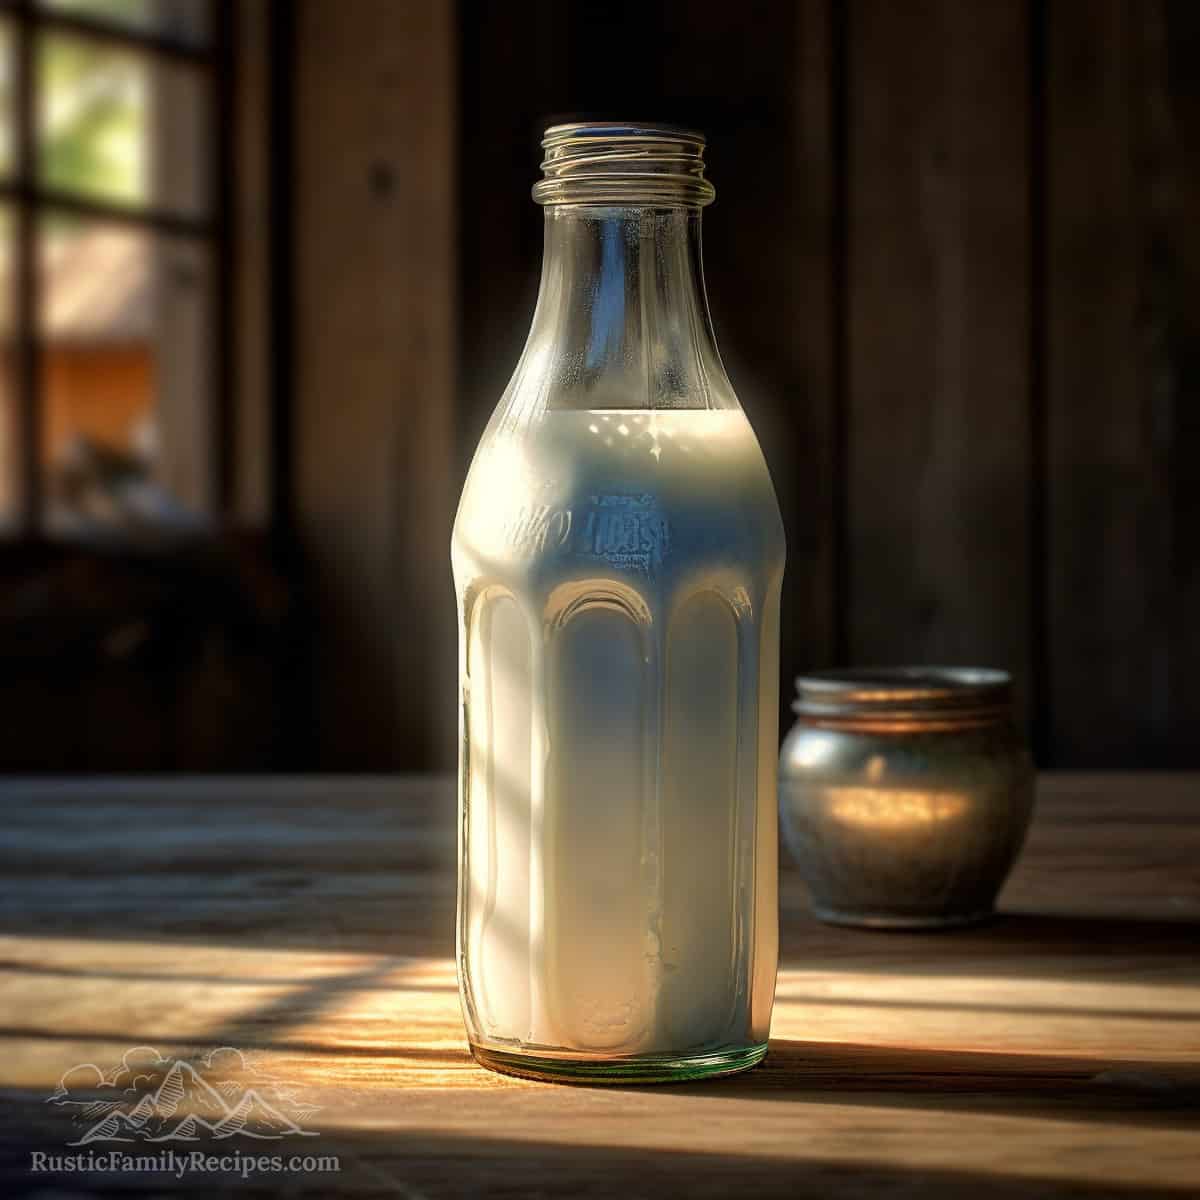 A jar of buttermilk in a rustic old fashioned bottle